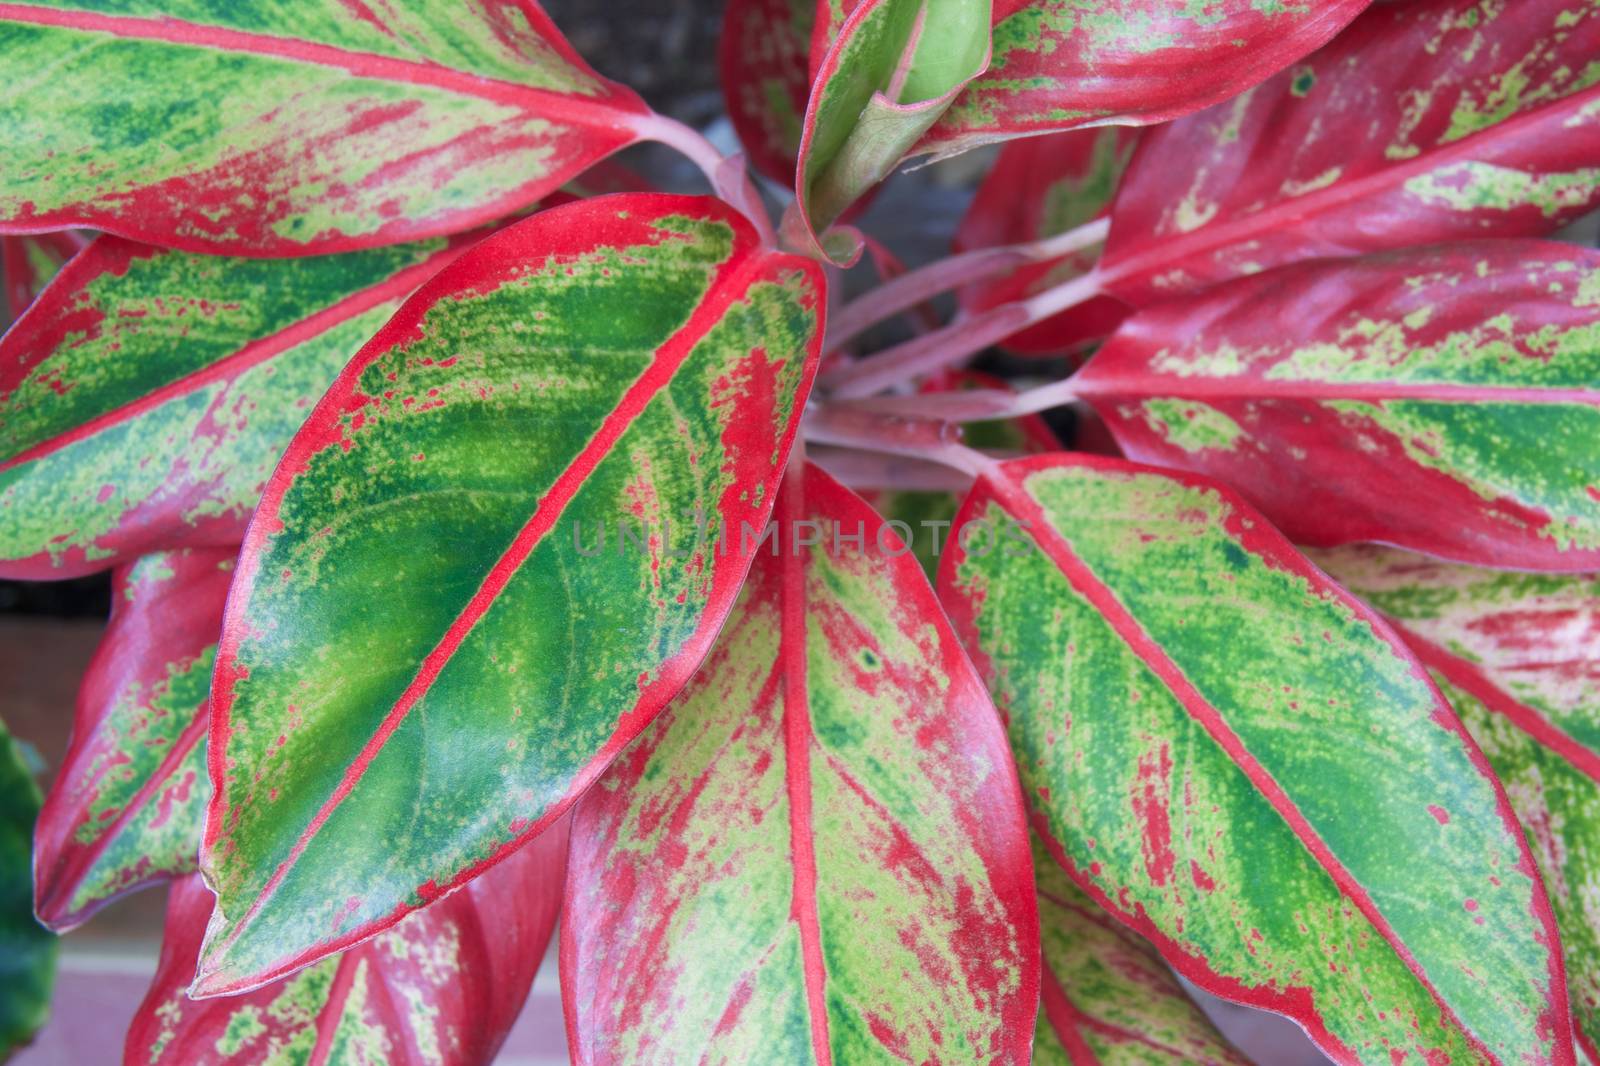 Aglaonema modestum or Chinese evergreen has green and red leaf.